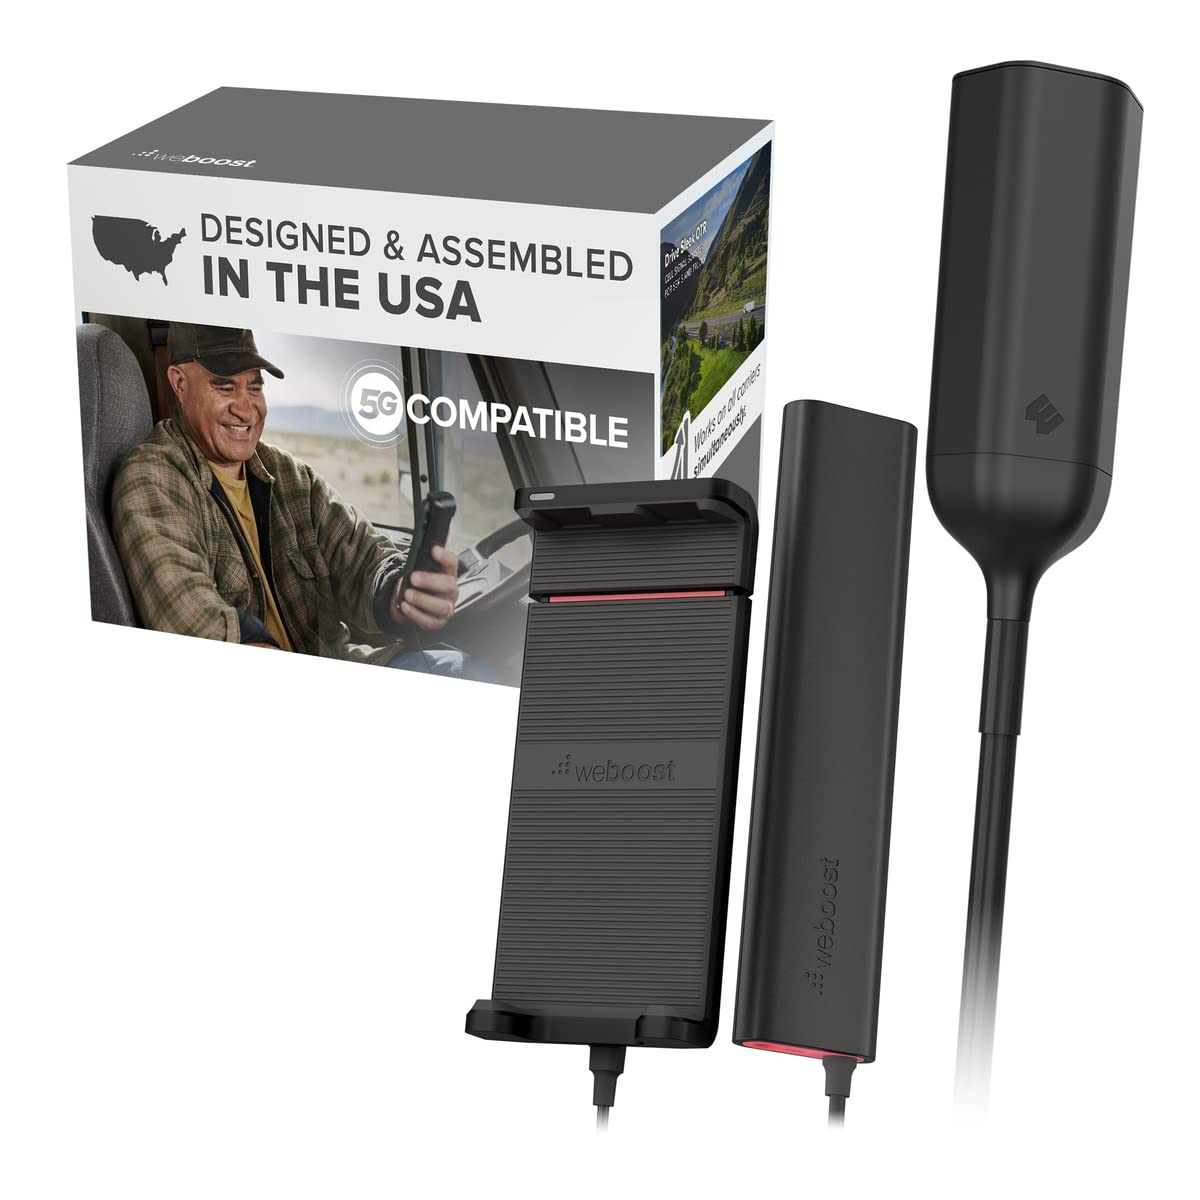 weBoost Drive Sleek OTR - Cell Phone Signal Booster for Trucks | Boosts 5G & 4G LTE for All U.S. Carriers- Verizon, AT&T, T-Mobile | Magnetic Roof Antenna | Made in USA | FCC Approved (model 470235)